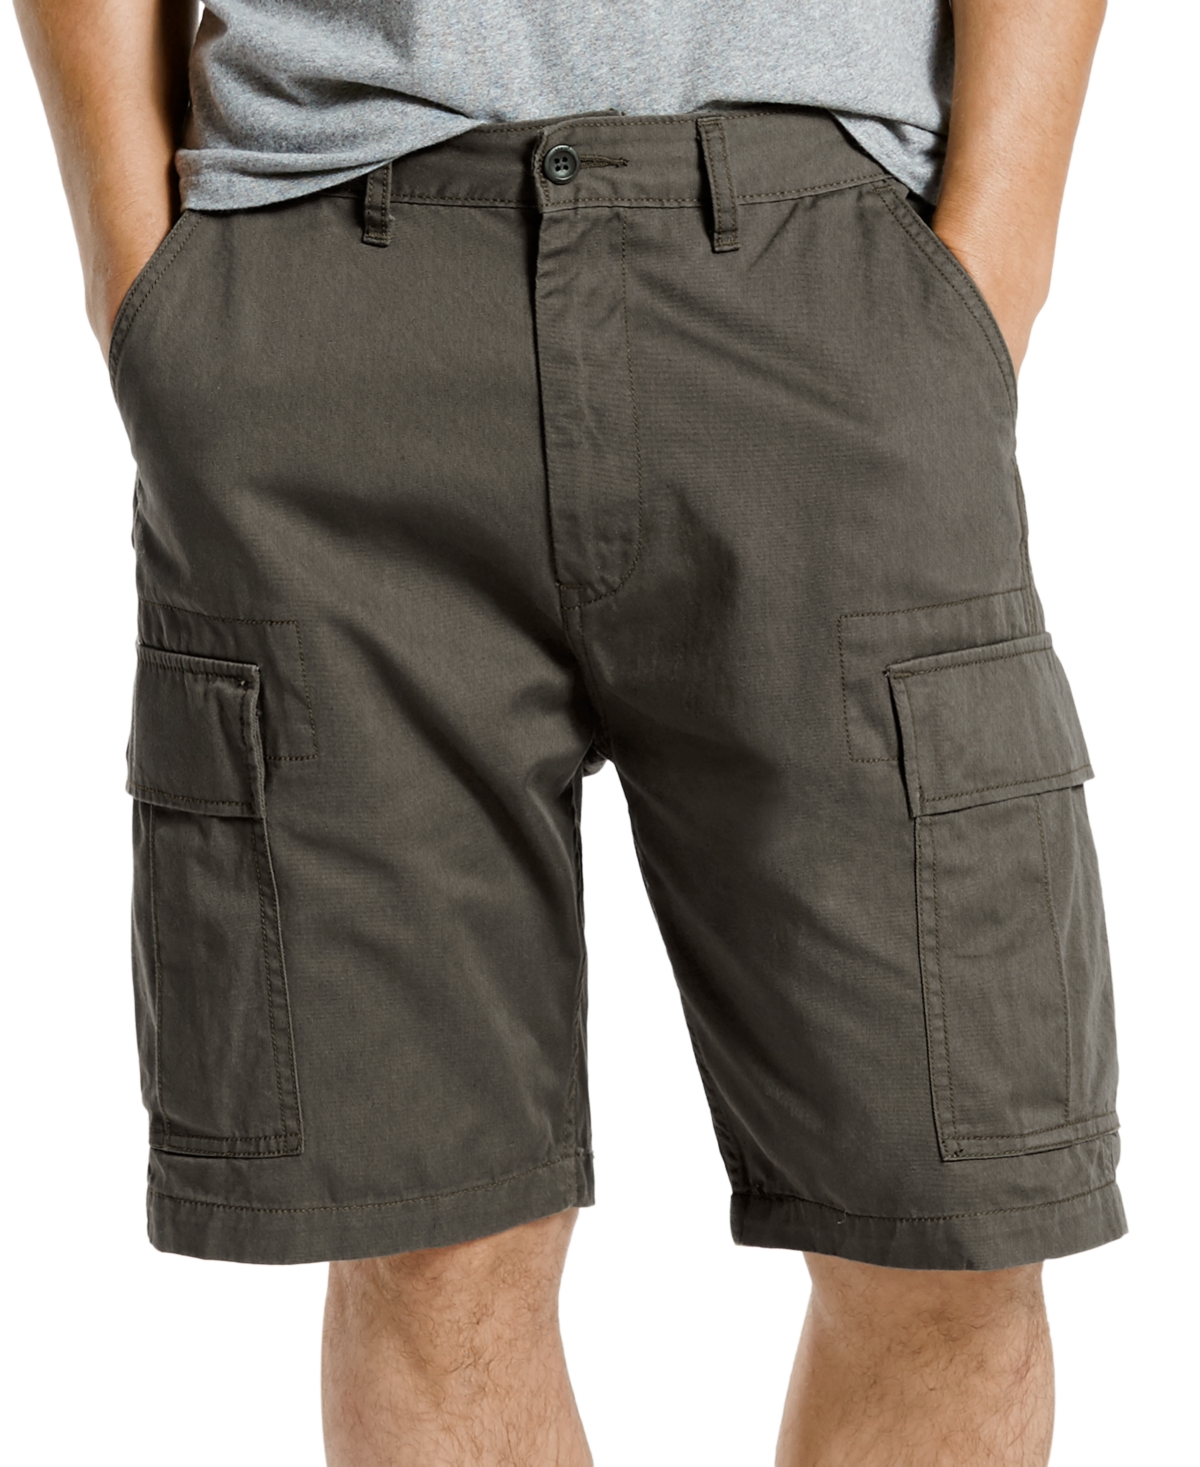 UPC 193239697407 product image for Levi's Men's Big and Tall Loose Fit Carrier Cargo Shorts | upcitemdb.com